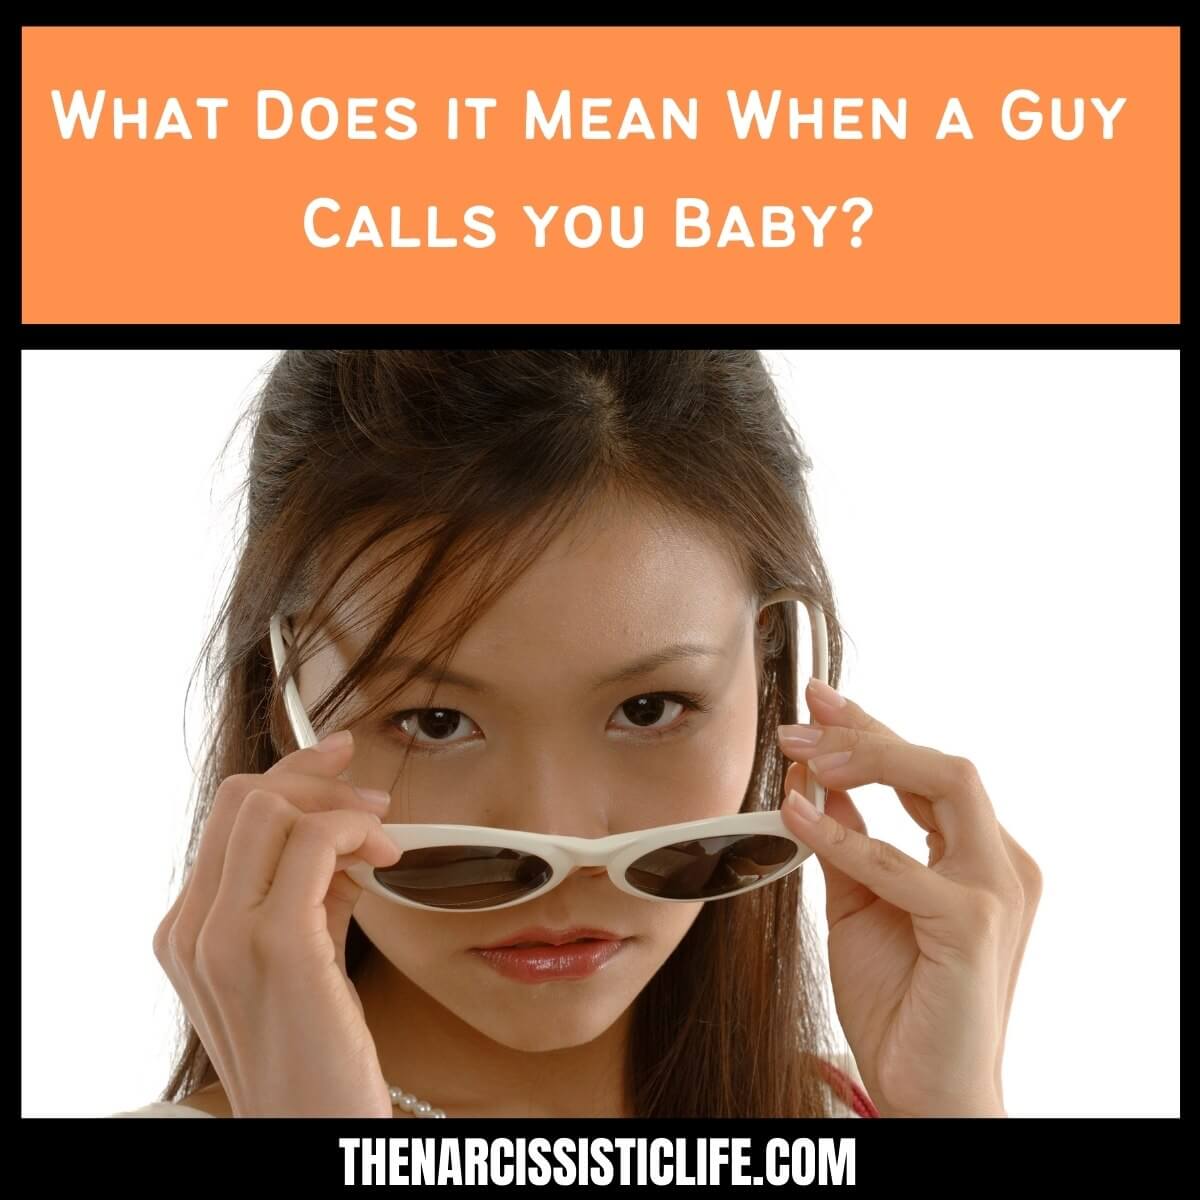 What Does it Mean When a Guy Calls you Baby